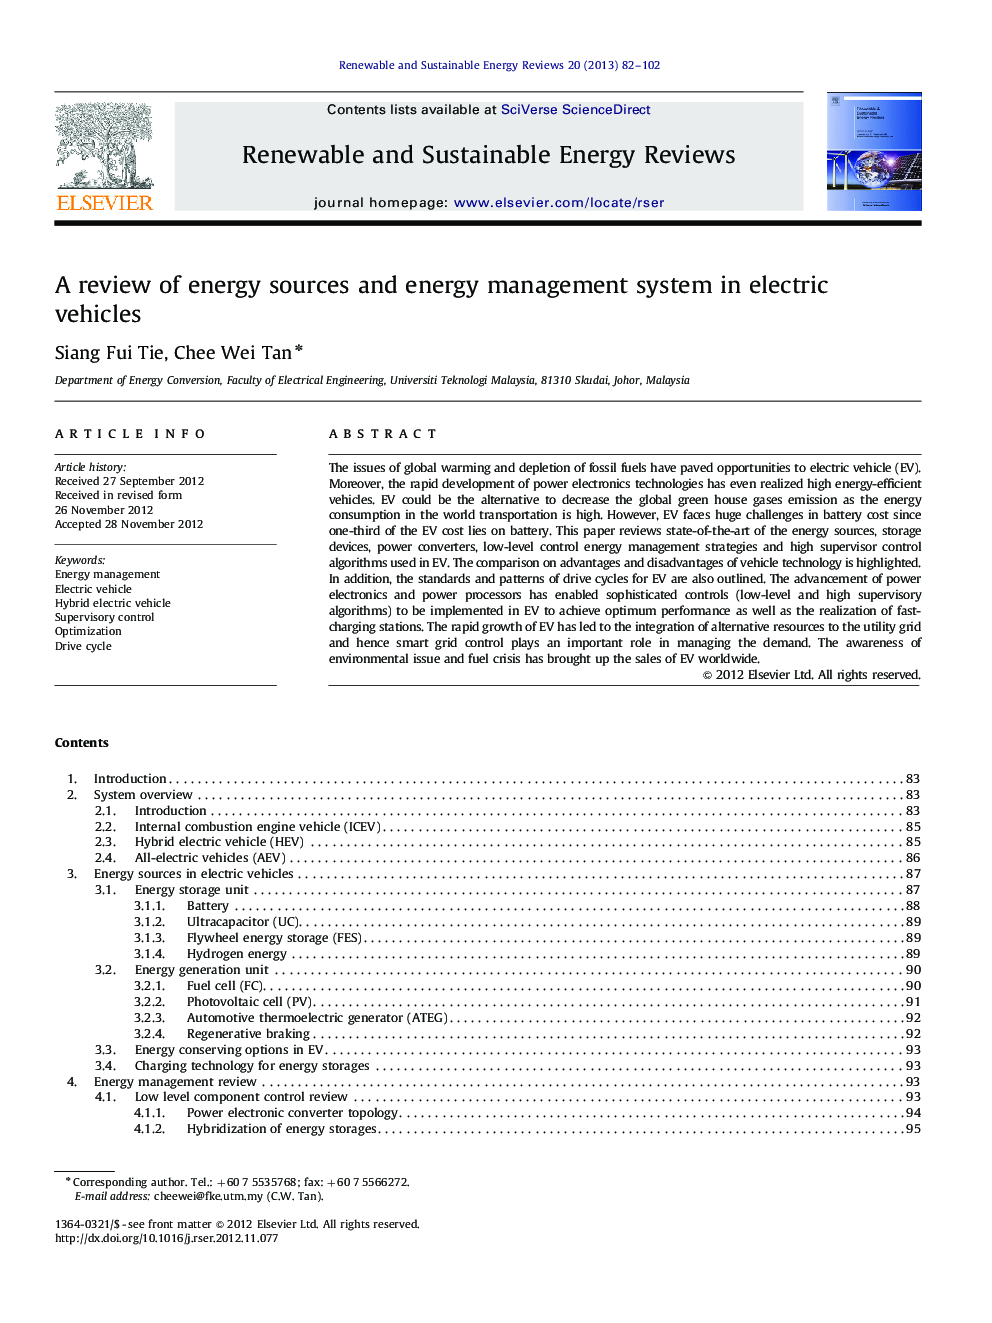 A review of energy sources and energy management system in electric vehicles